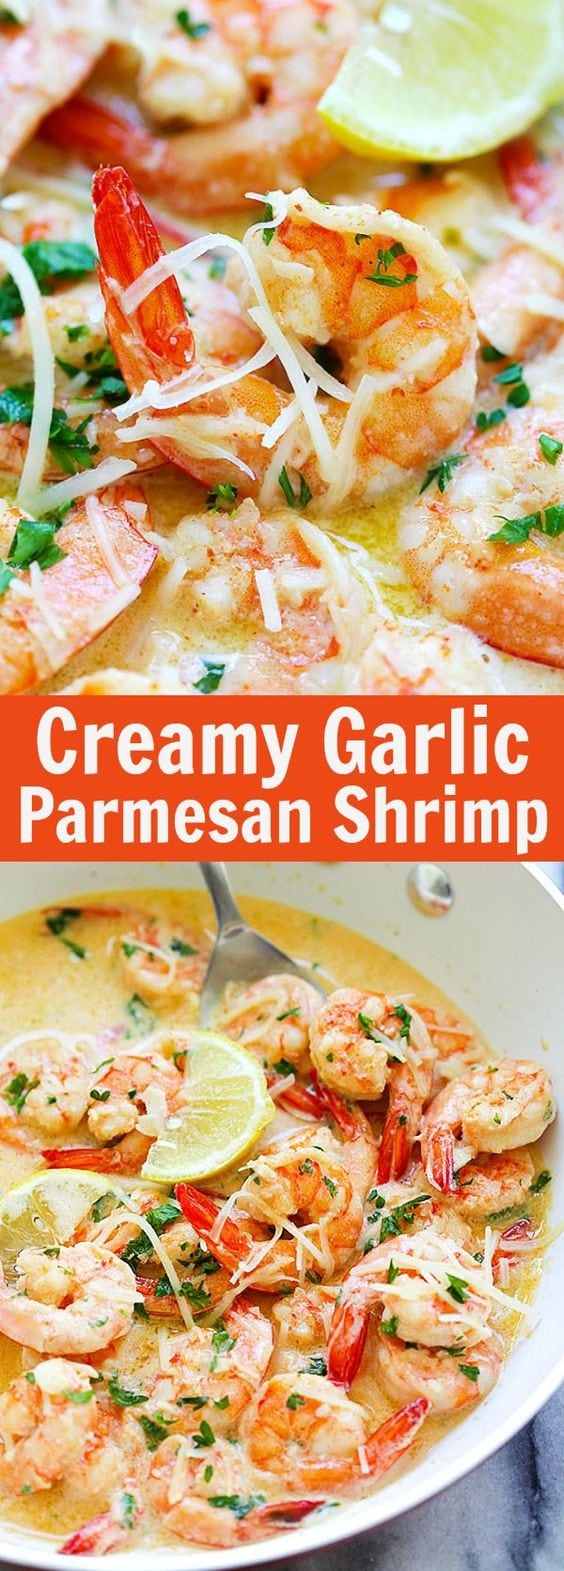 BEST shrimp ever, with rich, buttery, creamy garlic Parmesan sauce. Takes 15 mins and so good | rasamalaysia.com